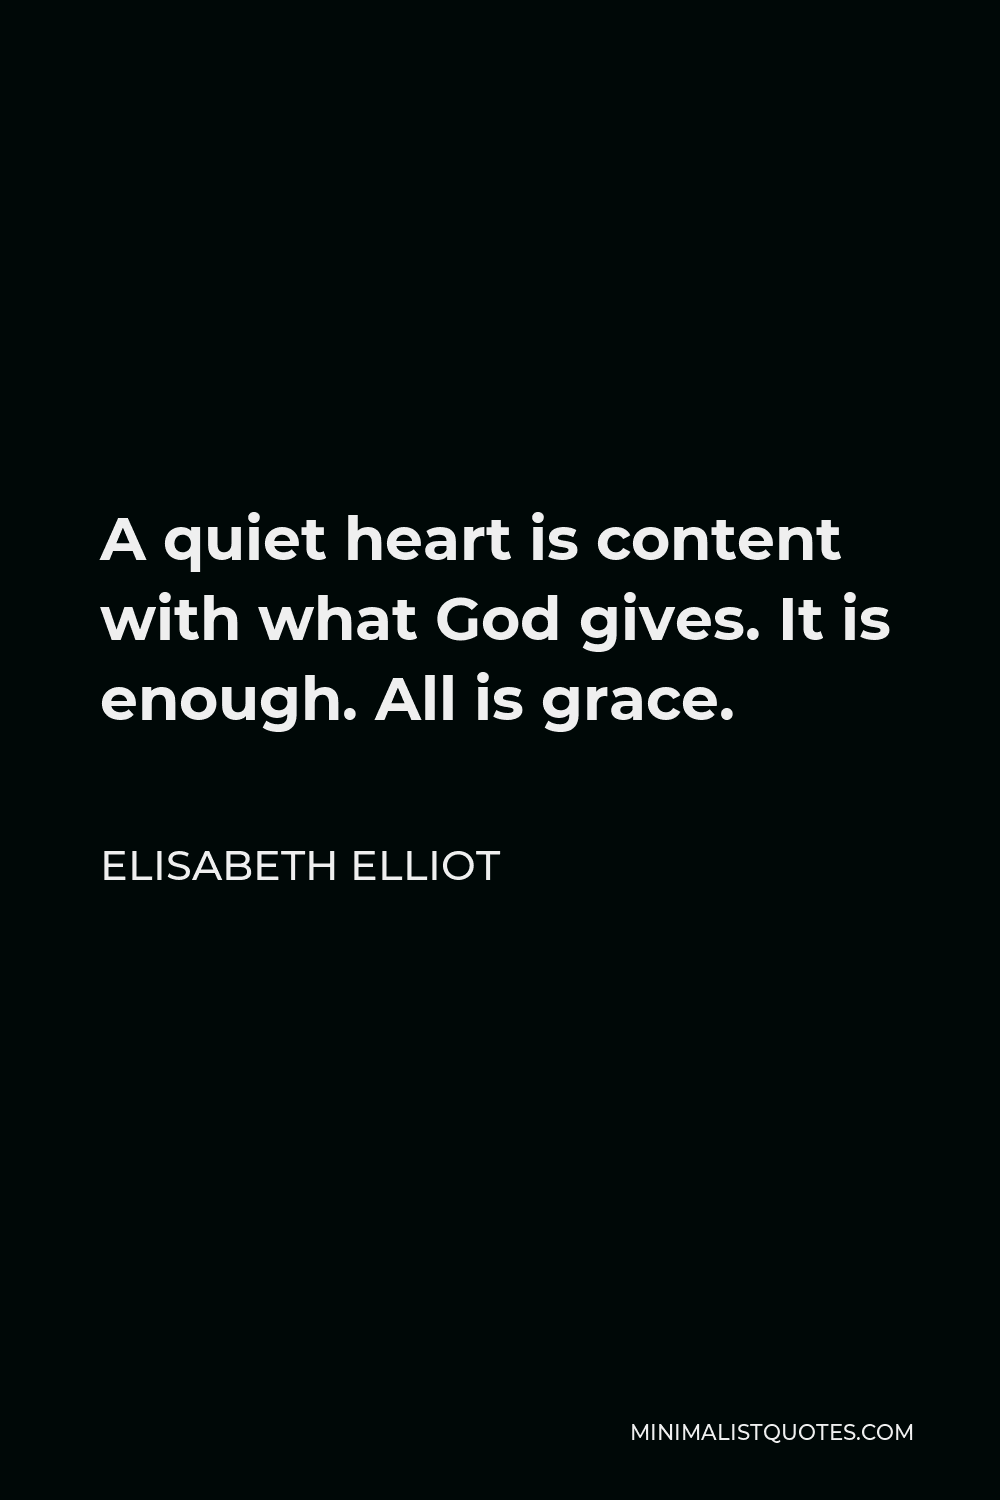 Elisabeth Elliot Quote - A quiet heart is content with what God gives. It is enough. All is grace.